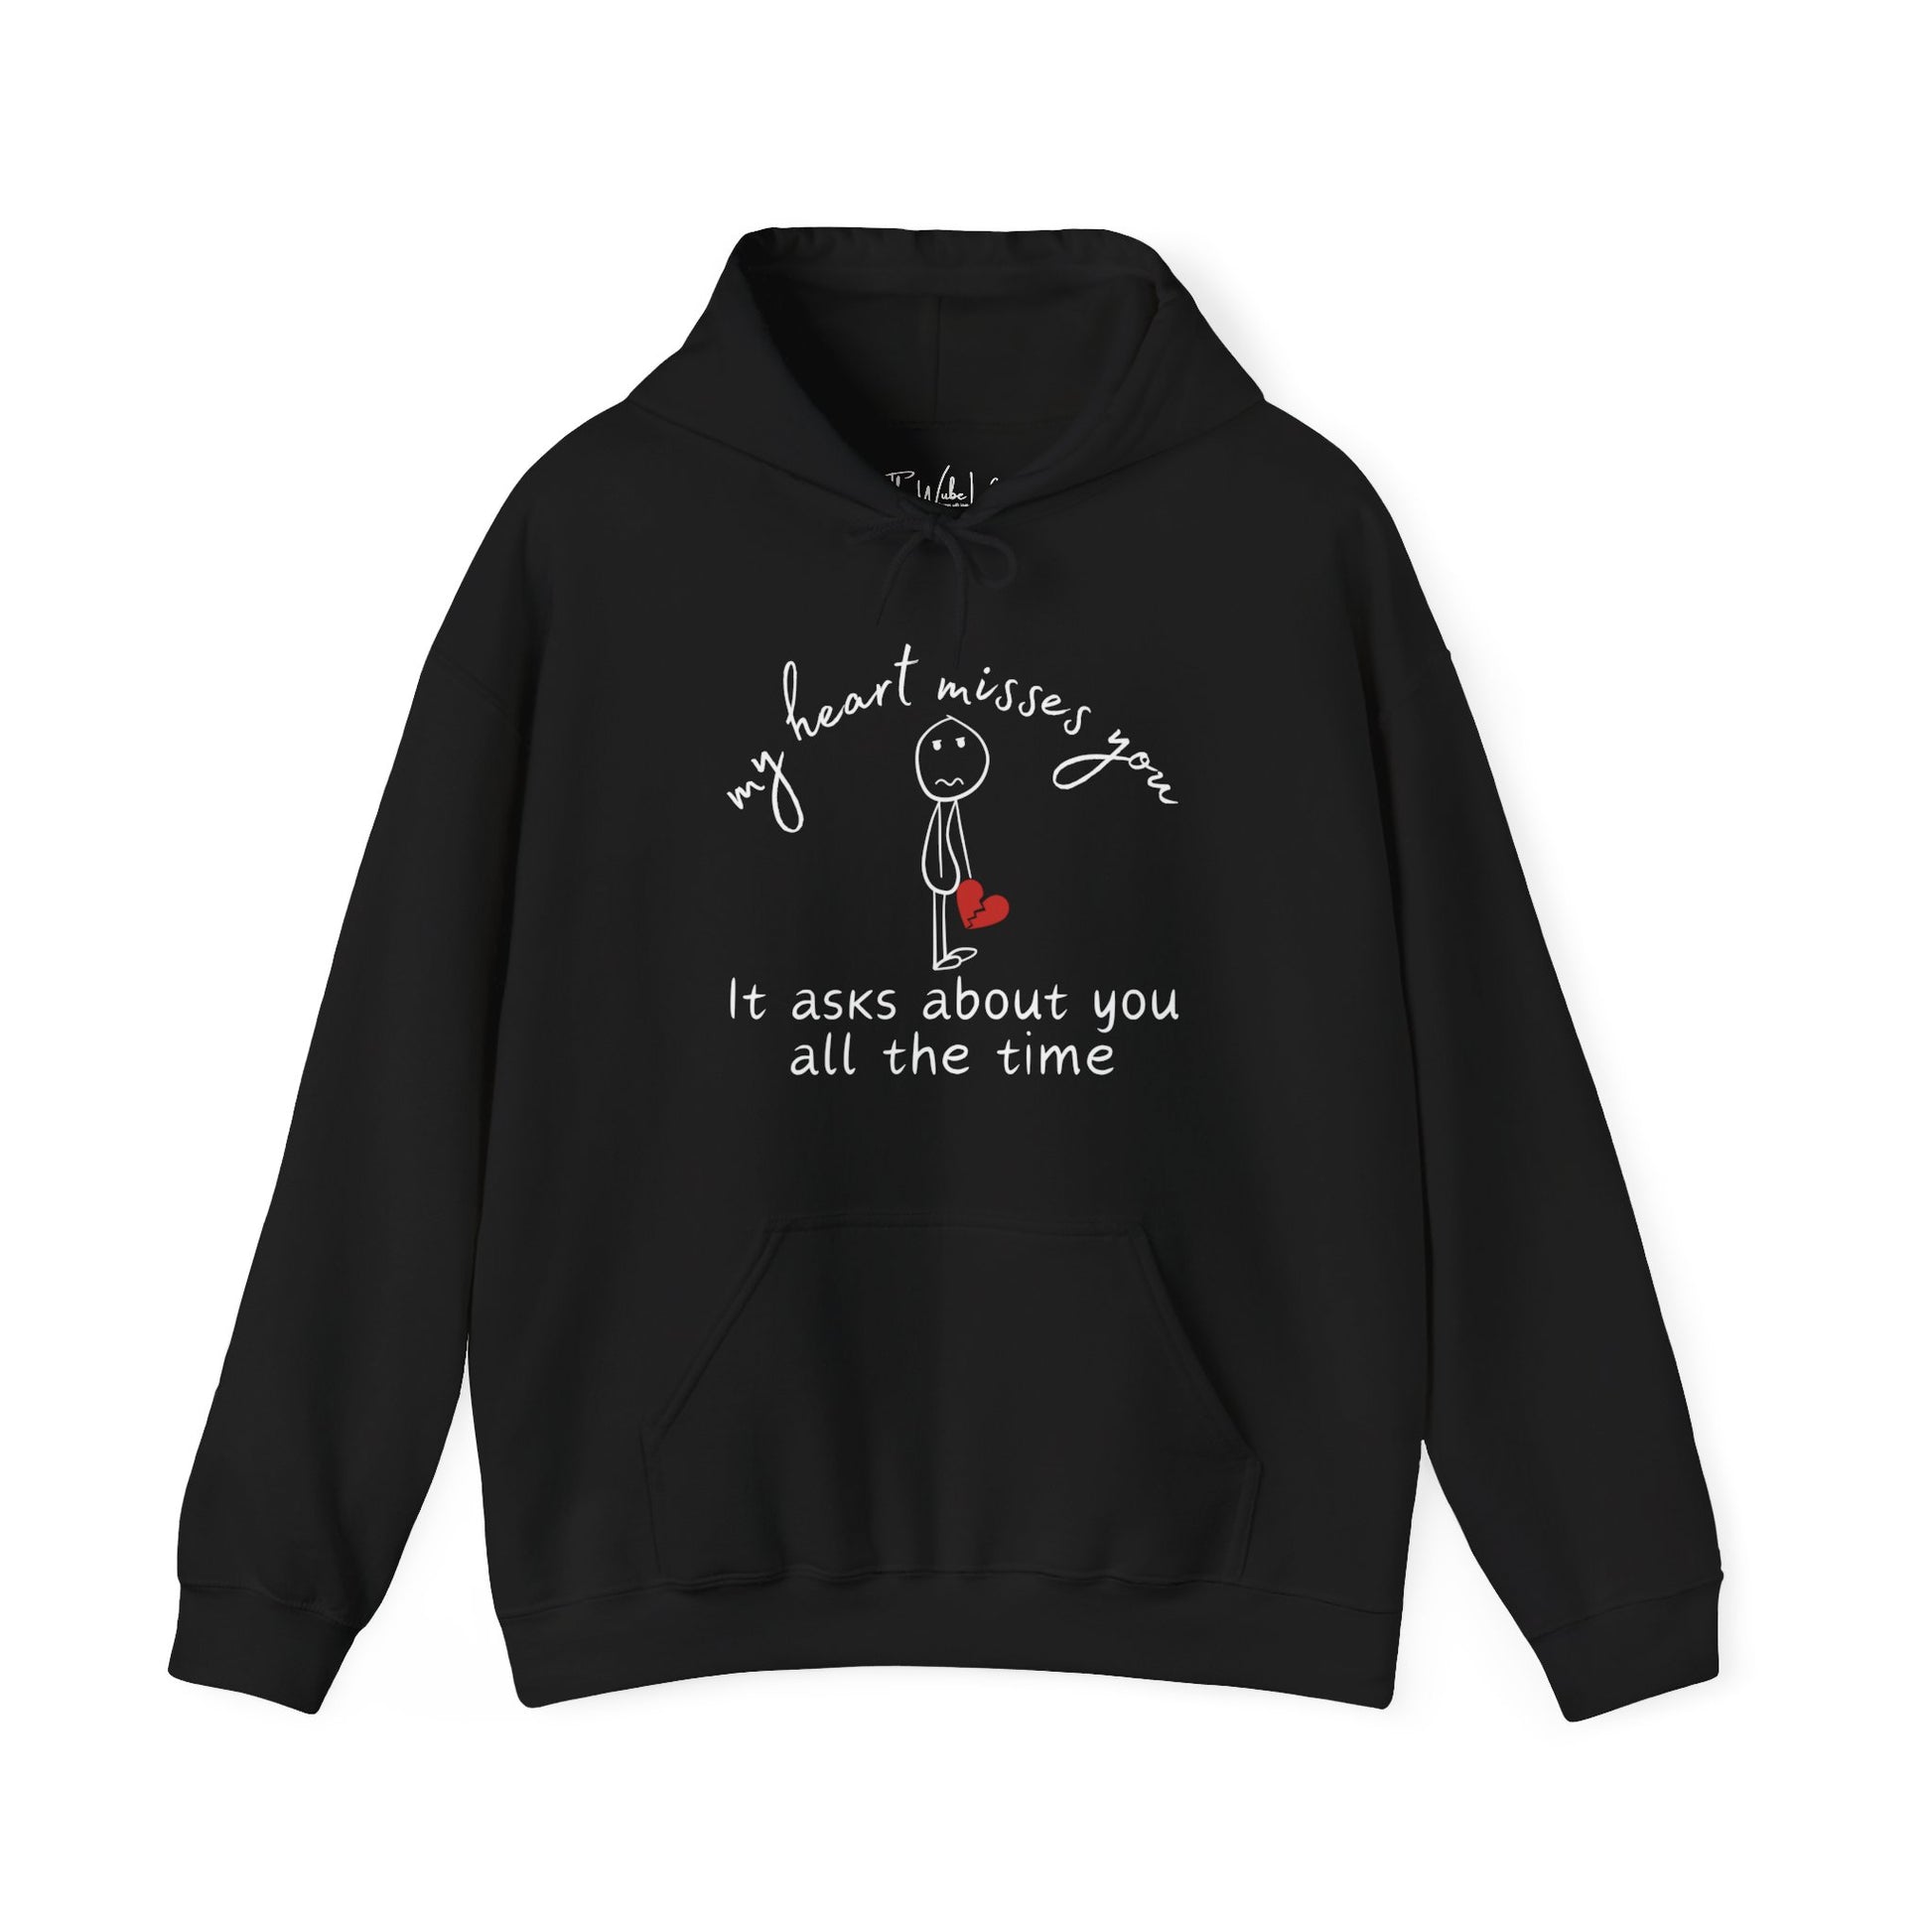 Gildan 18500 Hooded Sweatshirt, color: black - hoodie to represent the tender moments shared and lingering memories that fill your heart after losing someone you love.